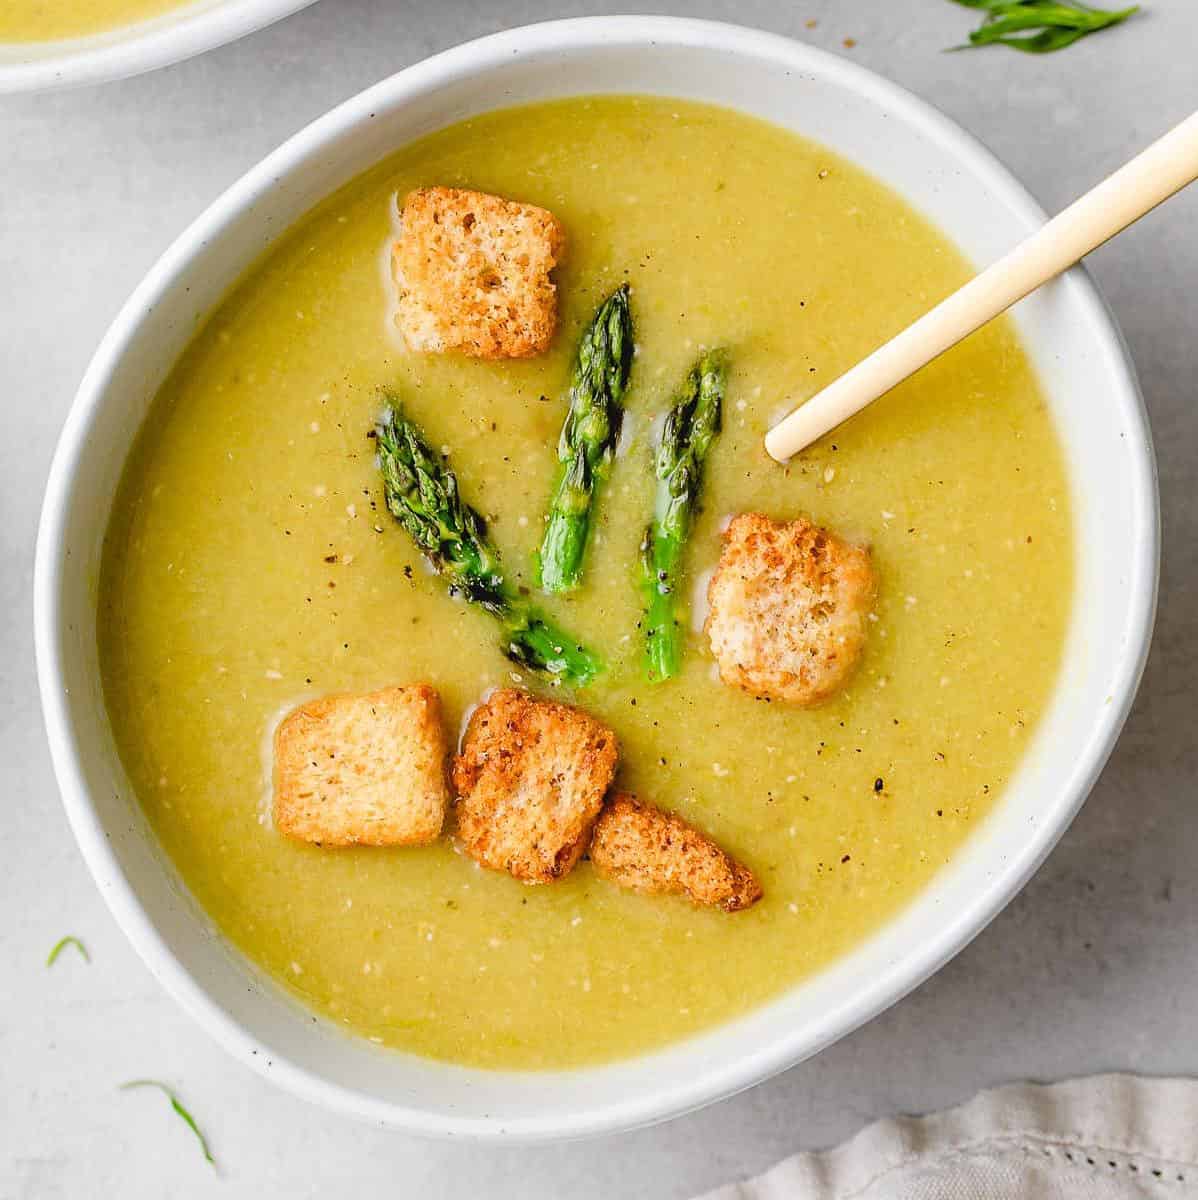  It has all the goodness of traditional cream of asparagus soup but minus the dairy! Perfect for vegans and non-vegans alike.